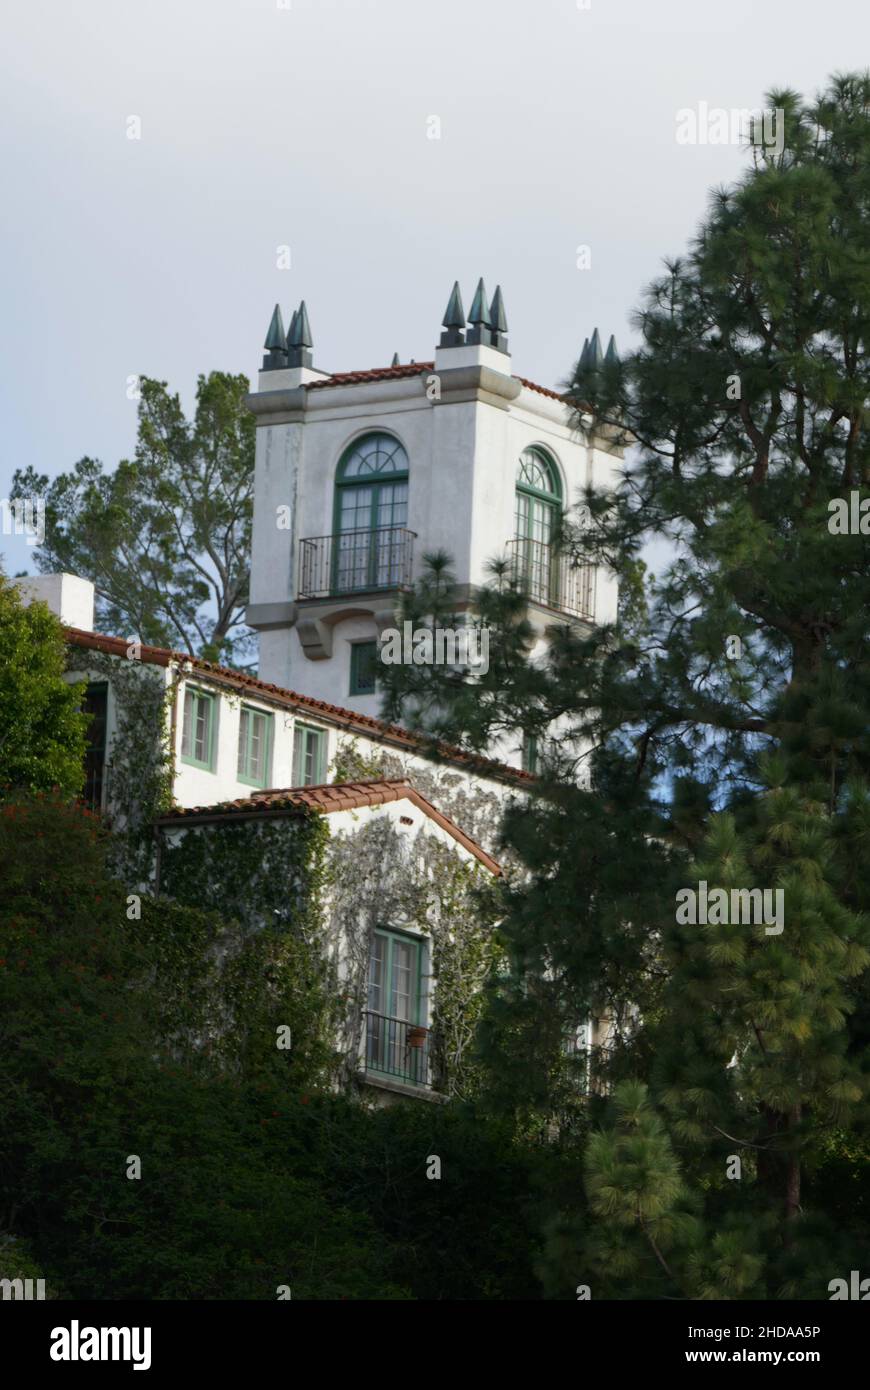 Los Angeles, California, USA 31st December 2021 A general view of atmosphere of Castillo del Lago, former home of Gangster Bugsy Siegel and Singer Madonna at 6342 Mullholland Highway on December 31, 2021 in Los Angeles, California, USA. Photo by Barry King/Alamy Stock Photo Stock Photo